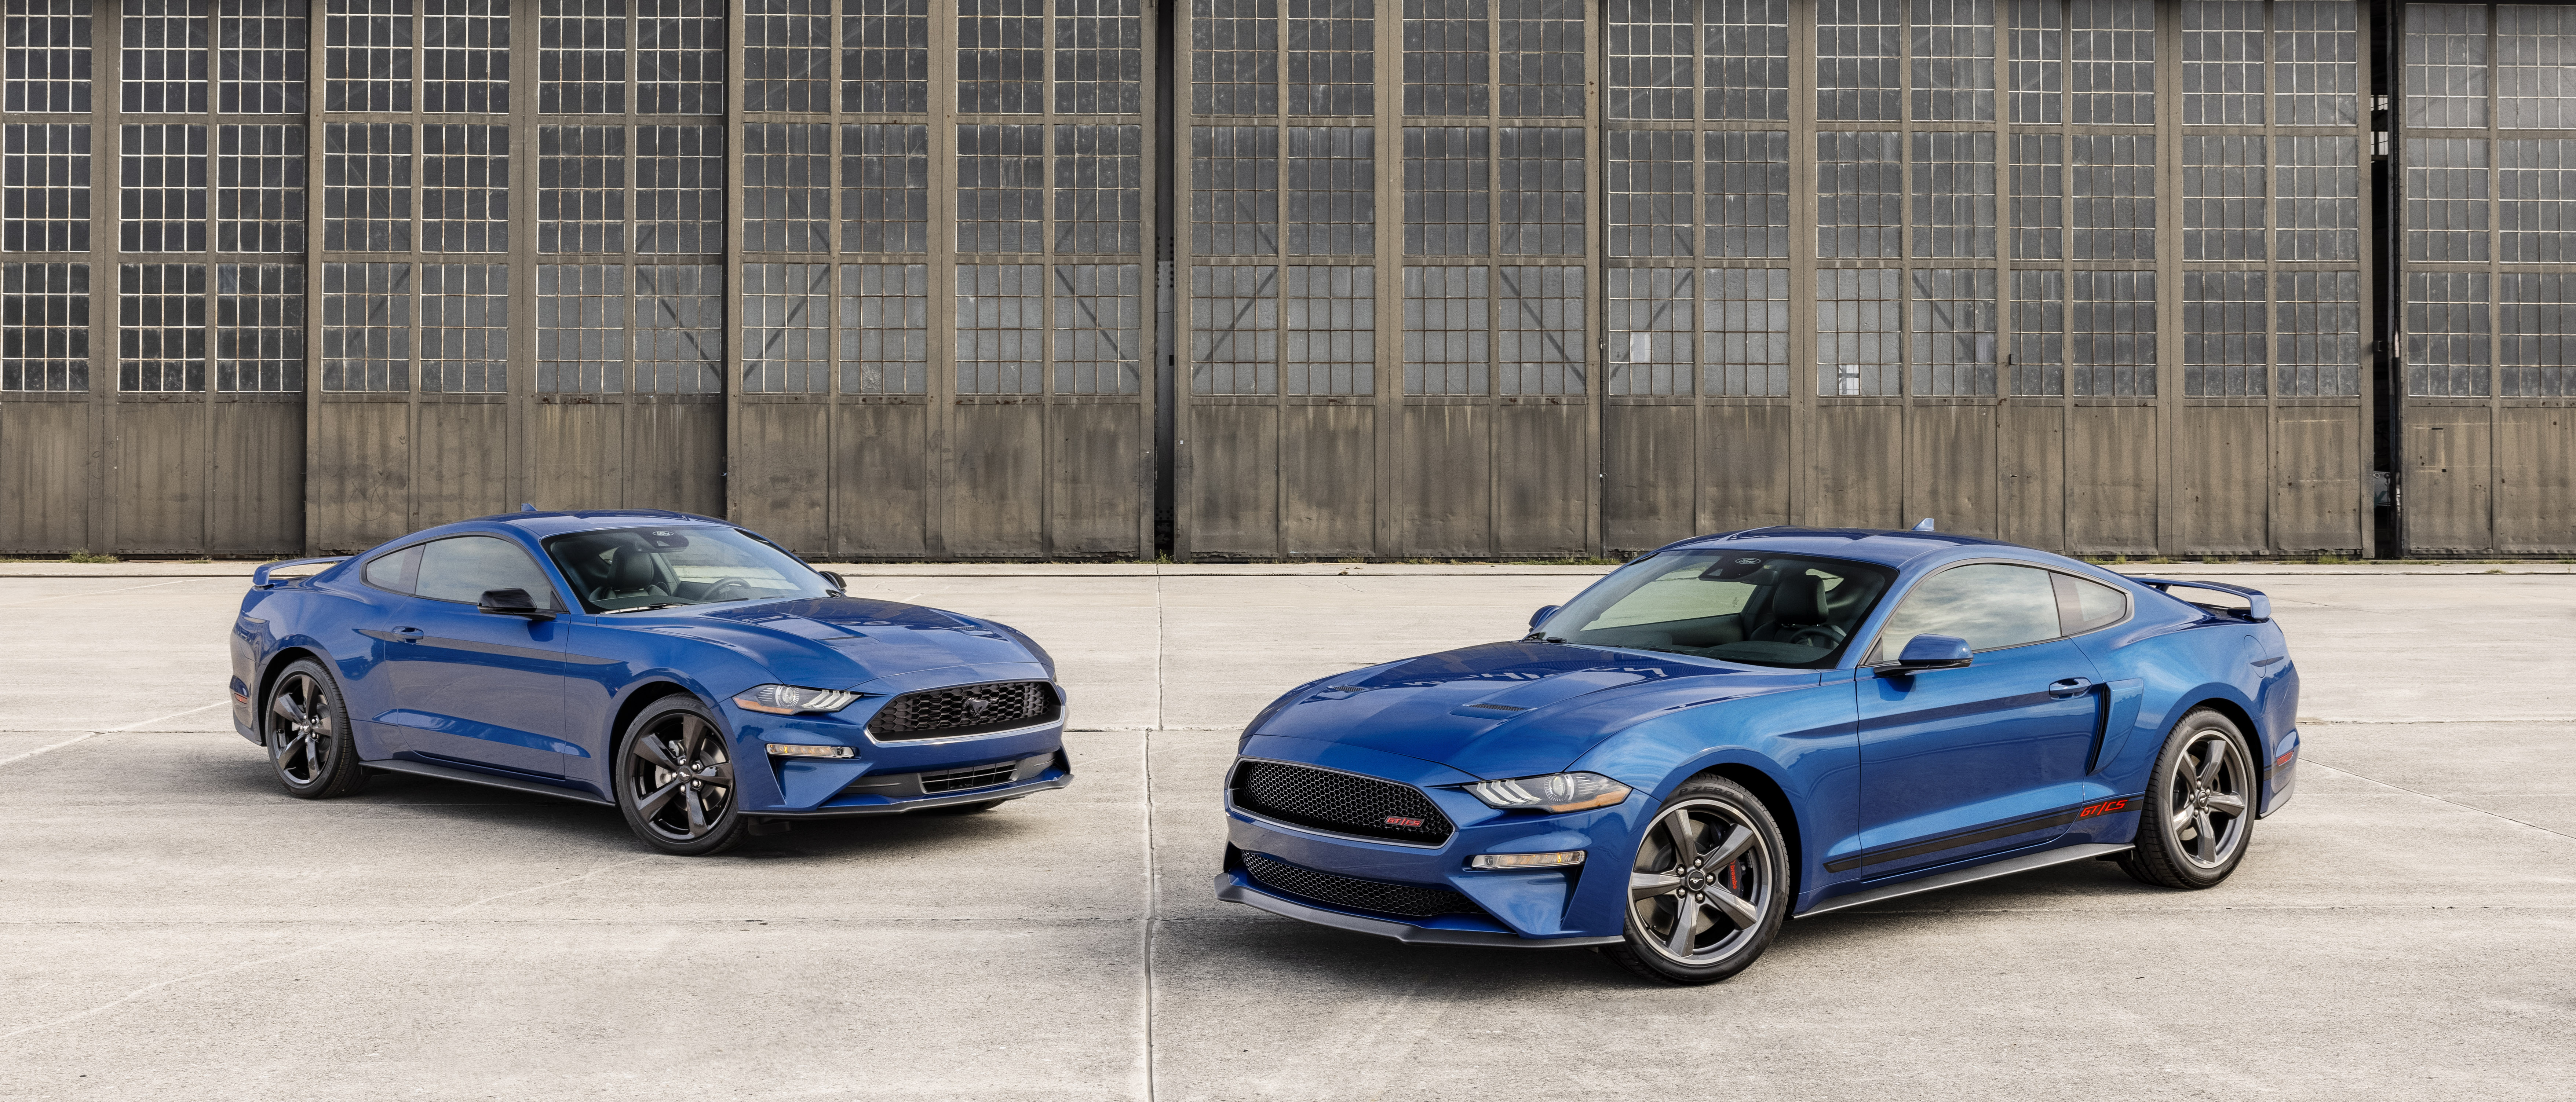 Ford to Offer new Stealth Edition and Upgraded California Special Package on 2022 Mustangs